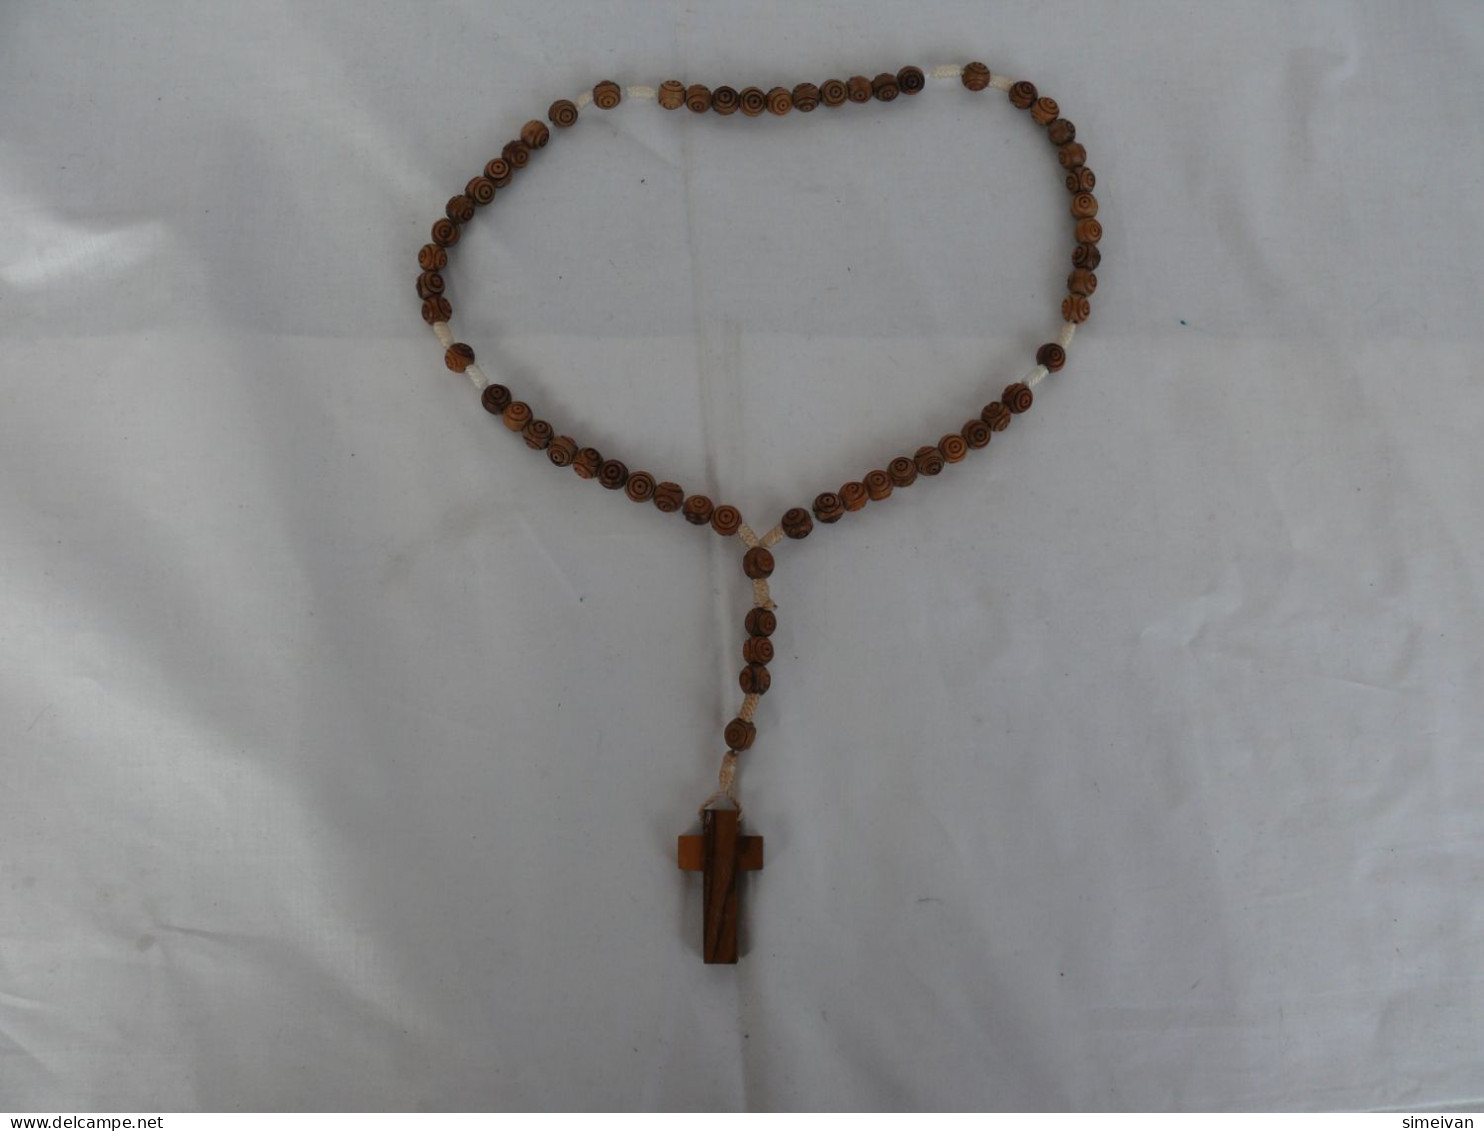 Interesting Prayer Bracelet Necklace Wooden Carved Beads #1860 - Necklaces/Chains